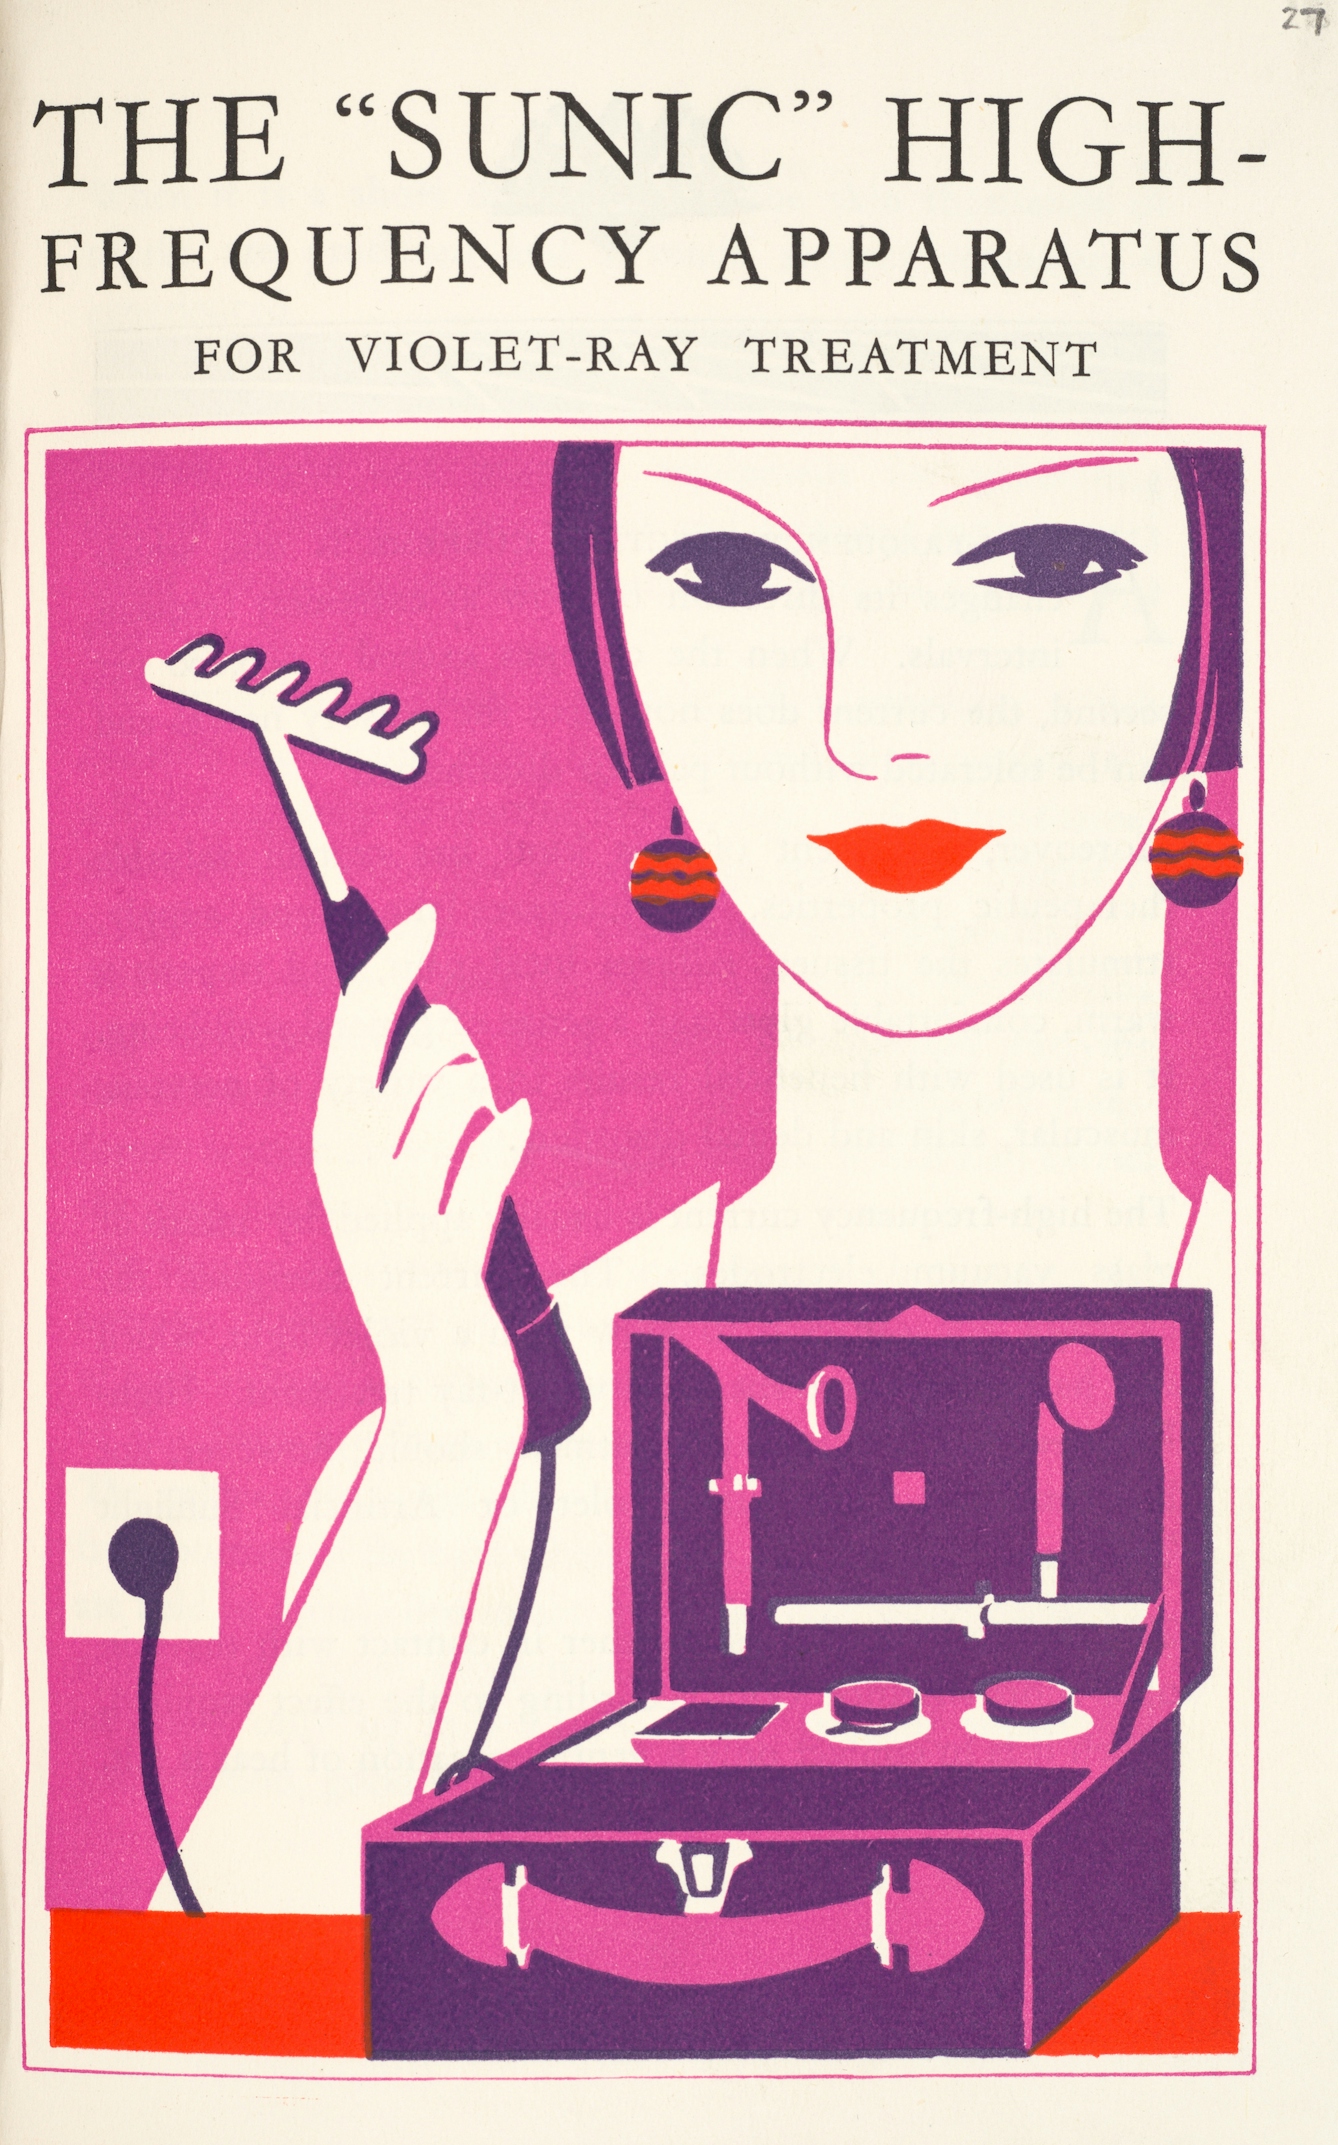 Photograph of the front cover of an illustrated booklet titled, 'The "Sunic" High-Frequency Apparatus for Violet-Ray Treatment'. The illustration in red, purple and violet shows the head and shoulders of a woman holding a wired handheld device with an open box of attachments in front of her.